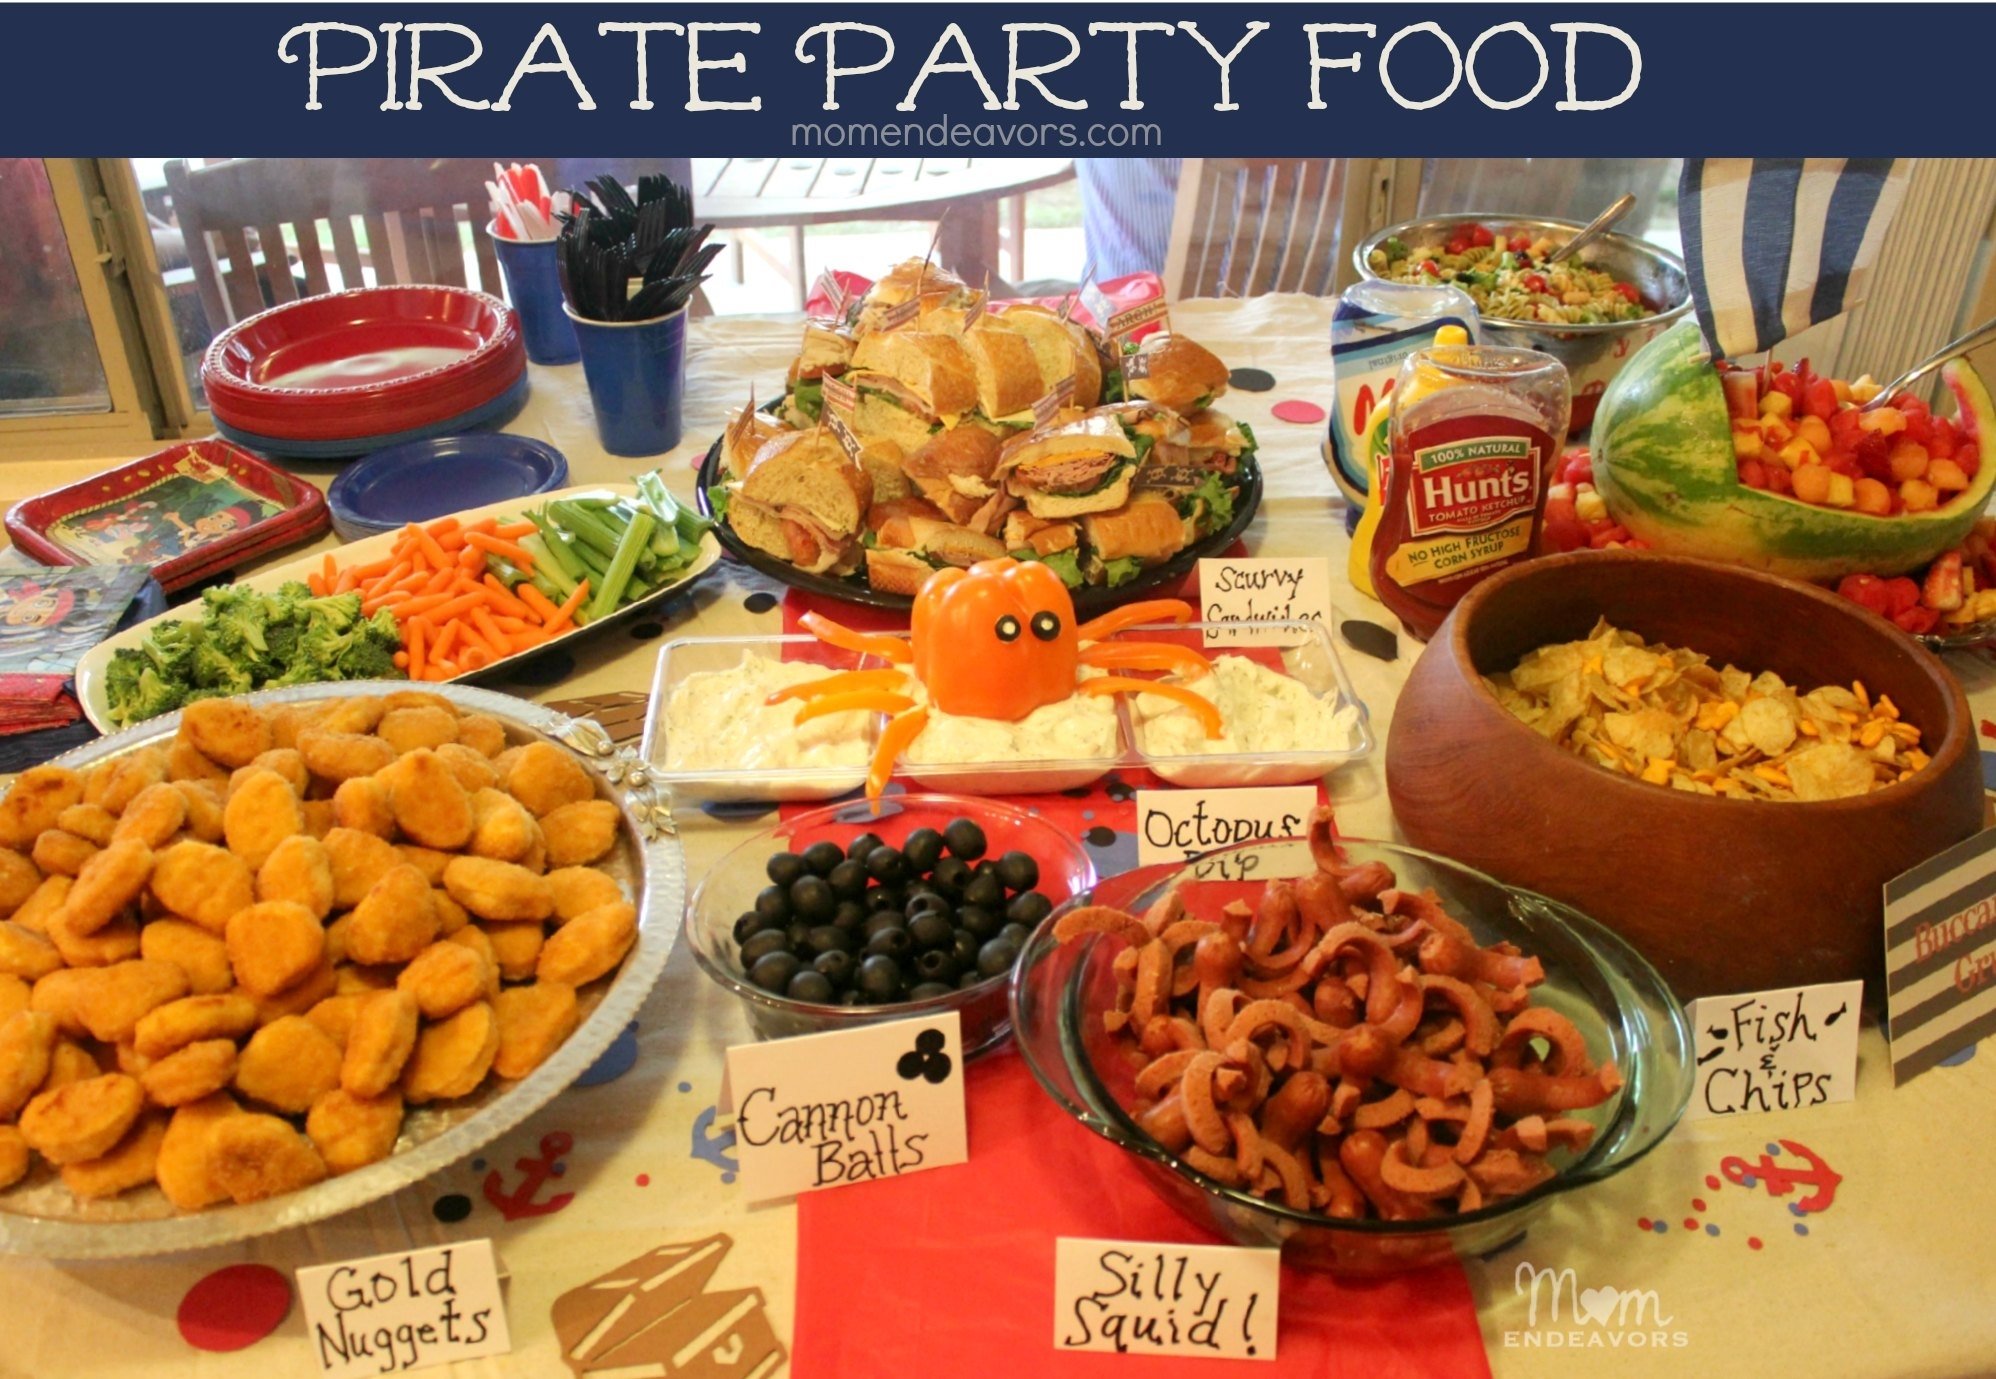 Birthday Party Food Ideas For Adults